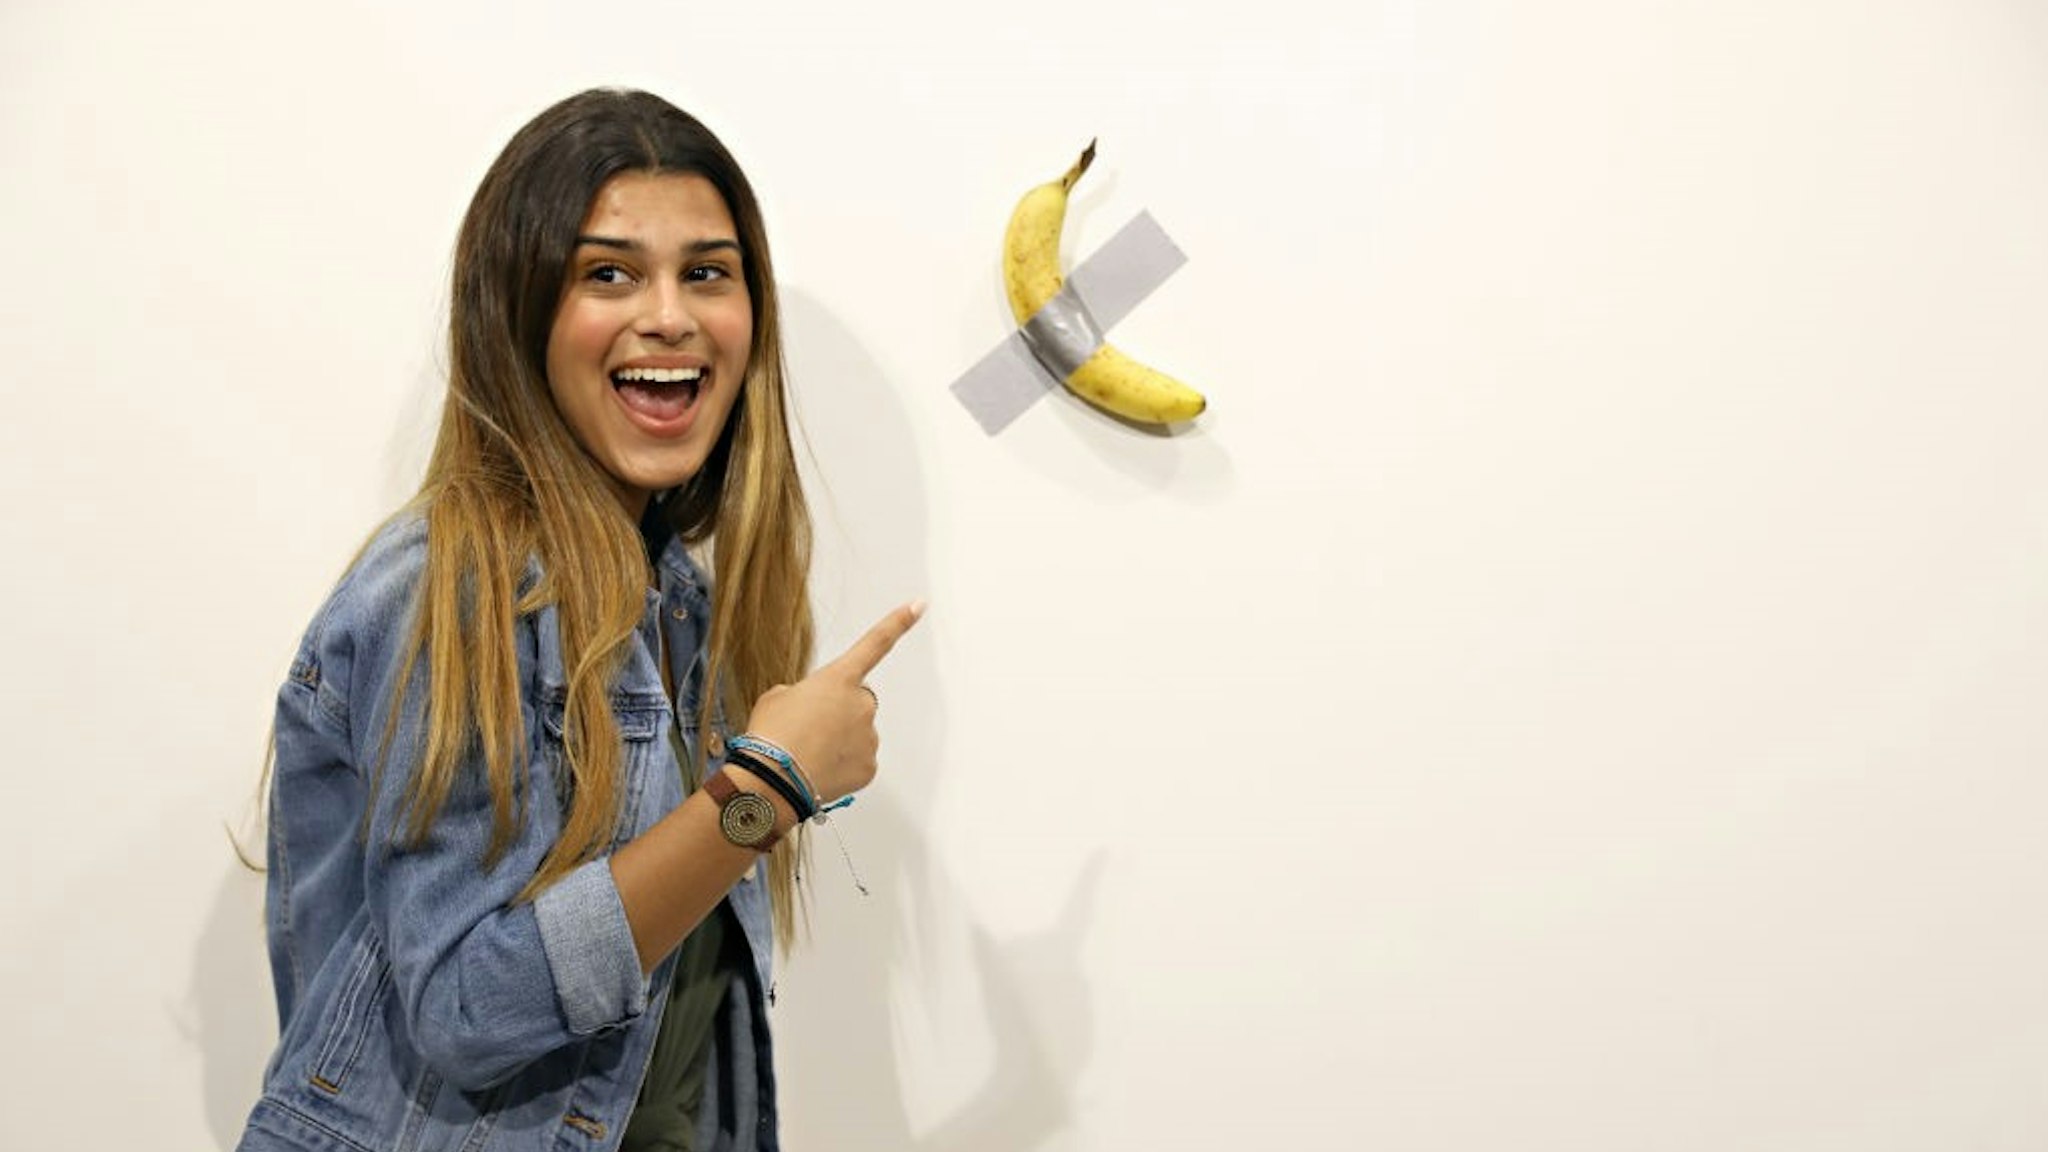 People post in front of Maurizio Cattelan's "Comedian" presented by Perrotin Gallery and on view at Art Basel Miami 2019 at Miami Beach Convention Center on December 6, 2019 in Miami Beach, Florida. Two of the three editions of the piece, which feature a banana duct-taped to a wall, have reportedly sold for $120,000.